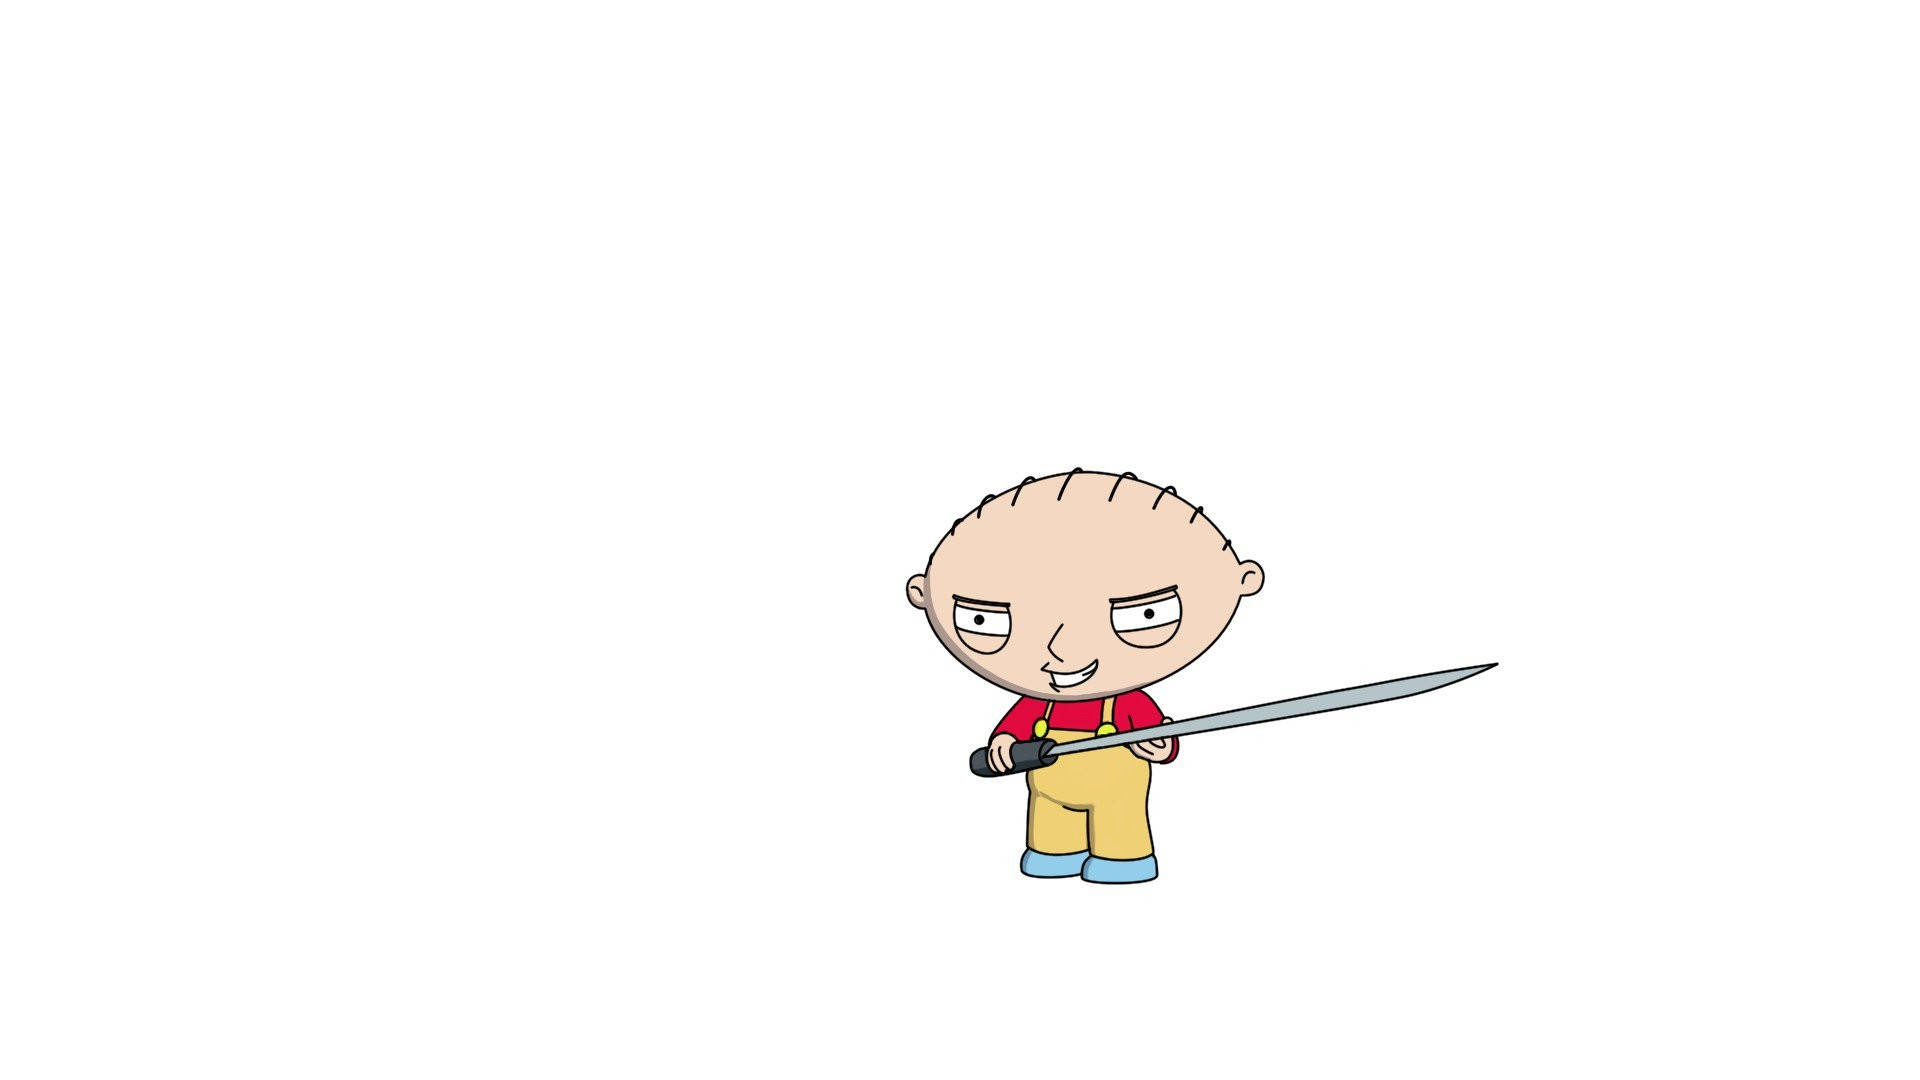 Caption: Adventurous Stewie Griffin with a sword in action Wallpaper